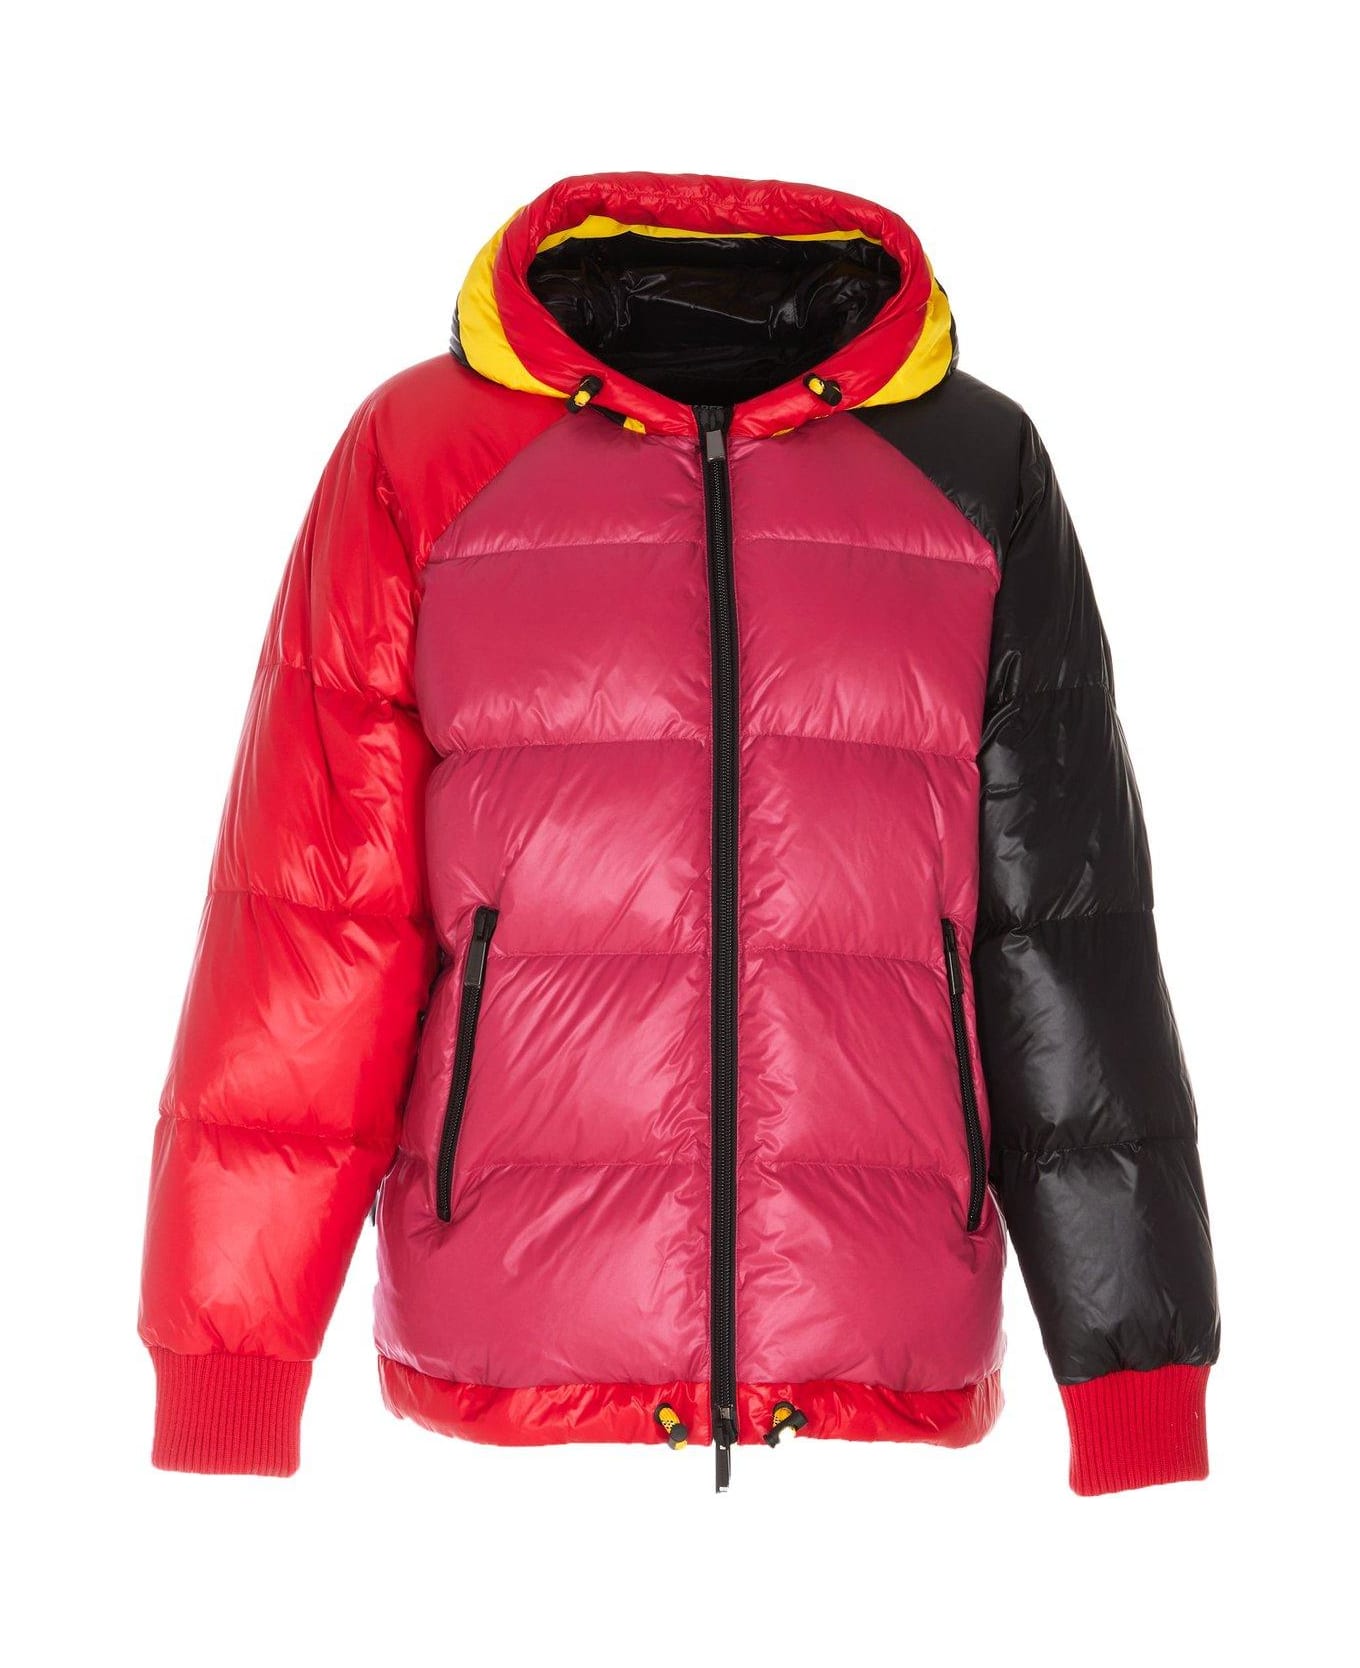 Dsquared2 Crest Puffer Jacket - Red